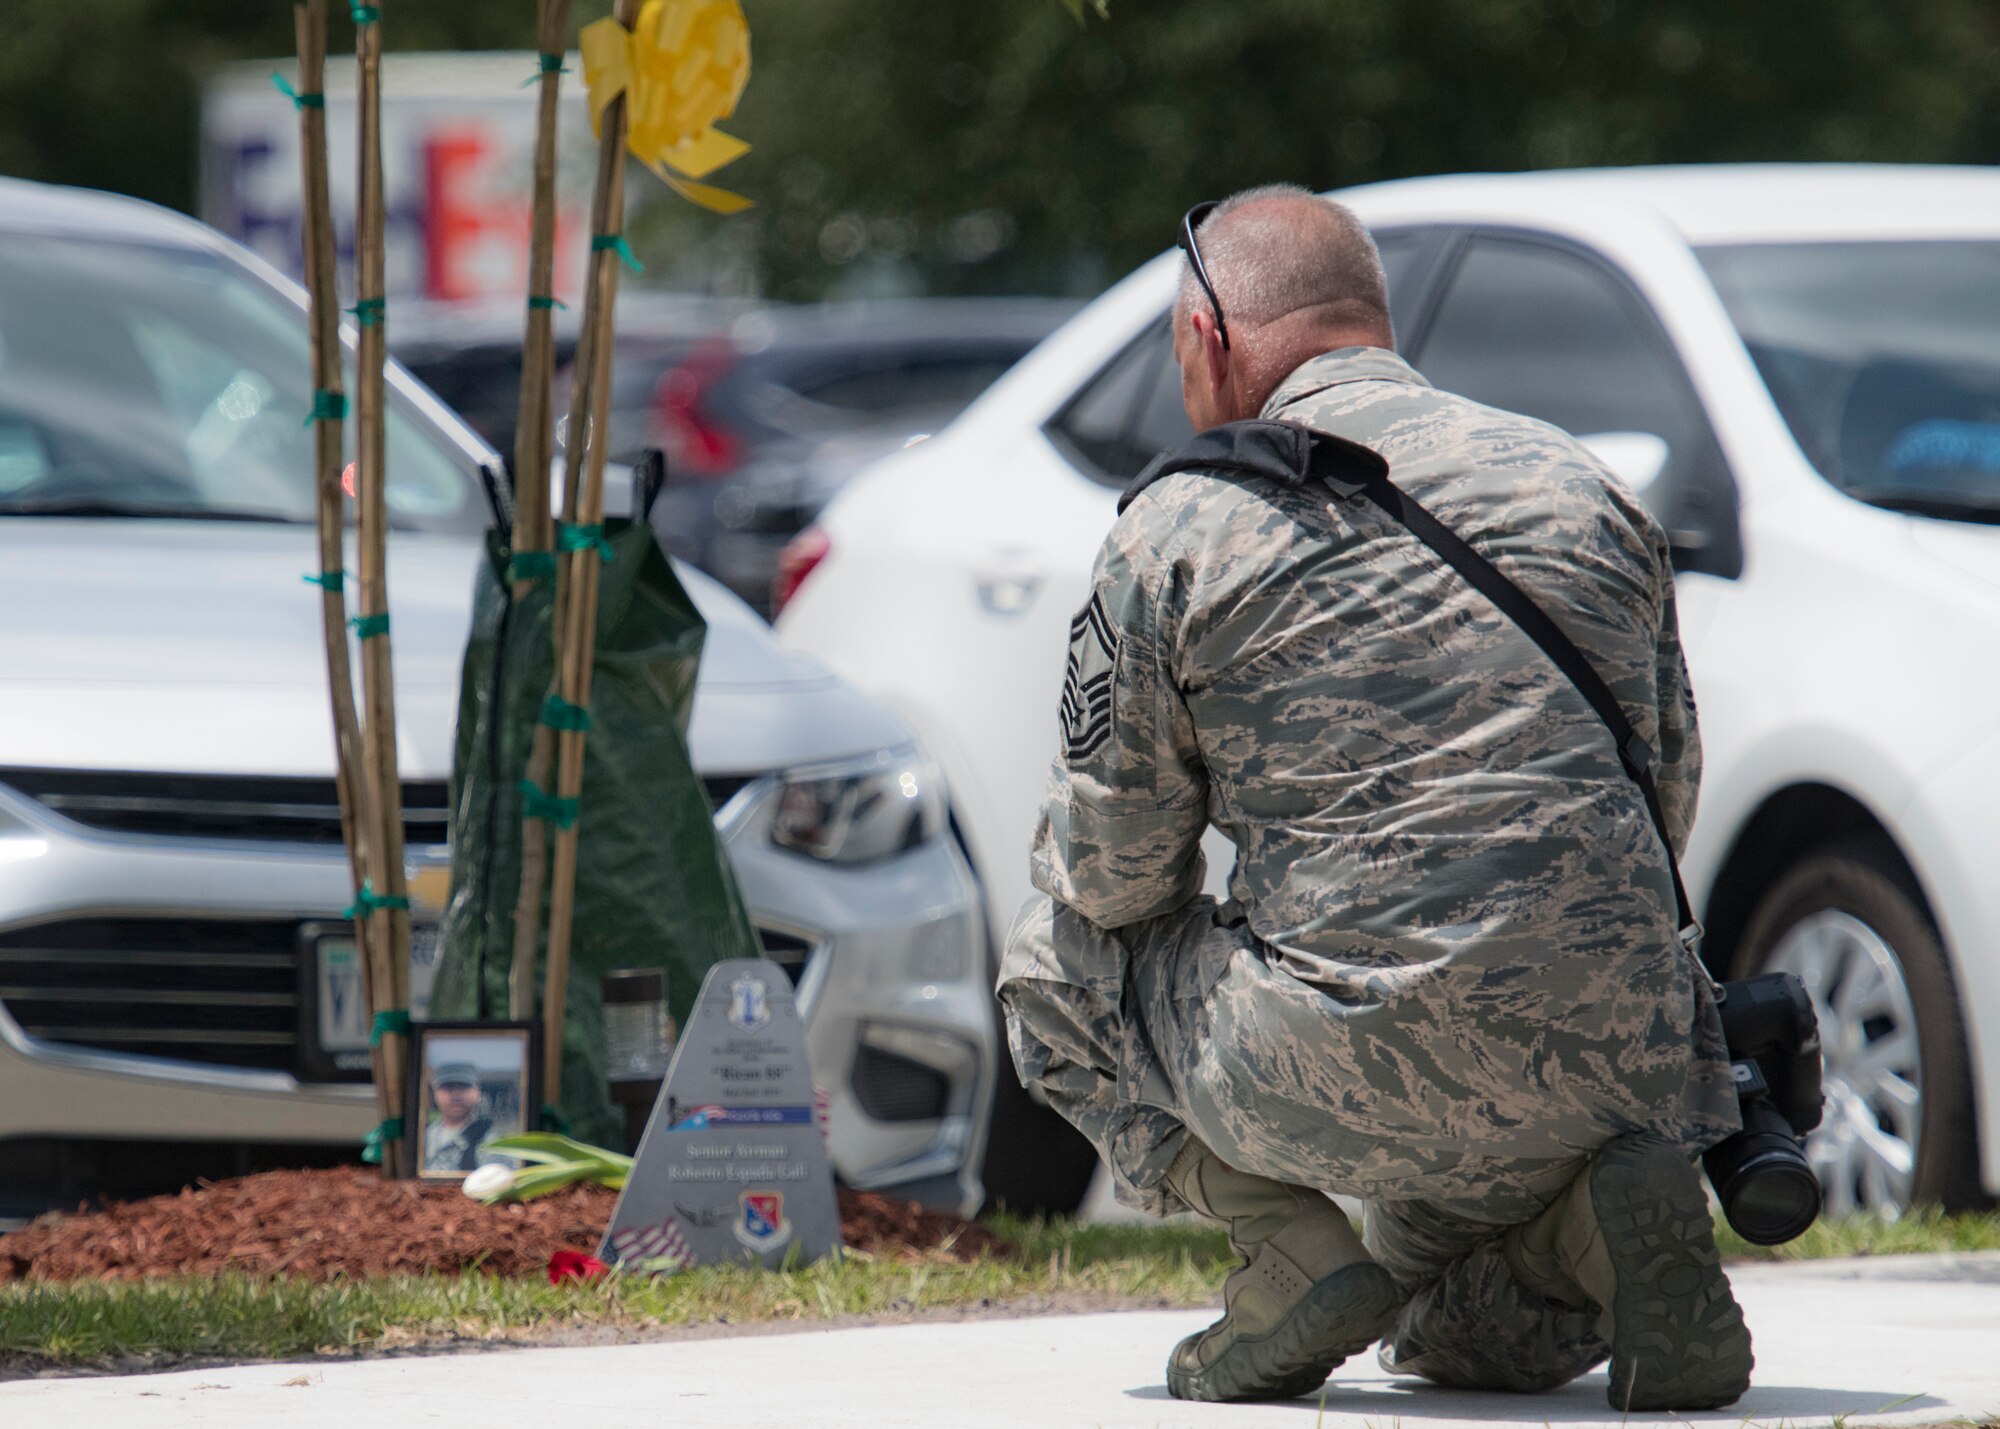 Senior Master Sgt. Roger Parsons, 116th Air Control Wing public affairs specialist, kneels at a tree planted in memory of a fallen Airman during a memorial ceremony May 2, 2019, in Port Wentworth, GA. The event paid homage to the lives of the nine Puerto Rican Air National Guard Airmen who lost their lives when their C-130 Hercules, assigned to the 156th Airlift Wing, crashed May 2, 2018.